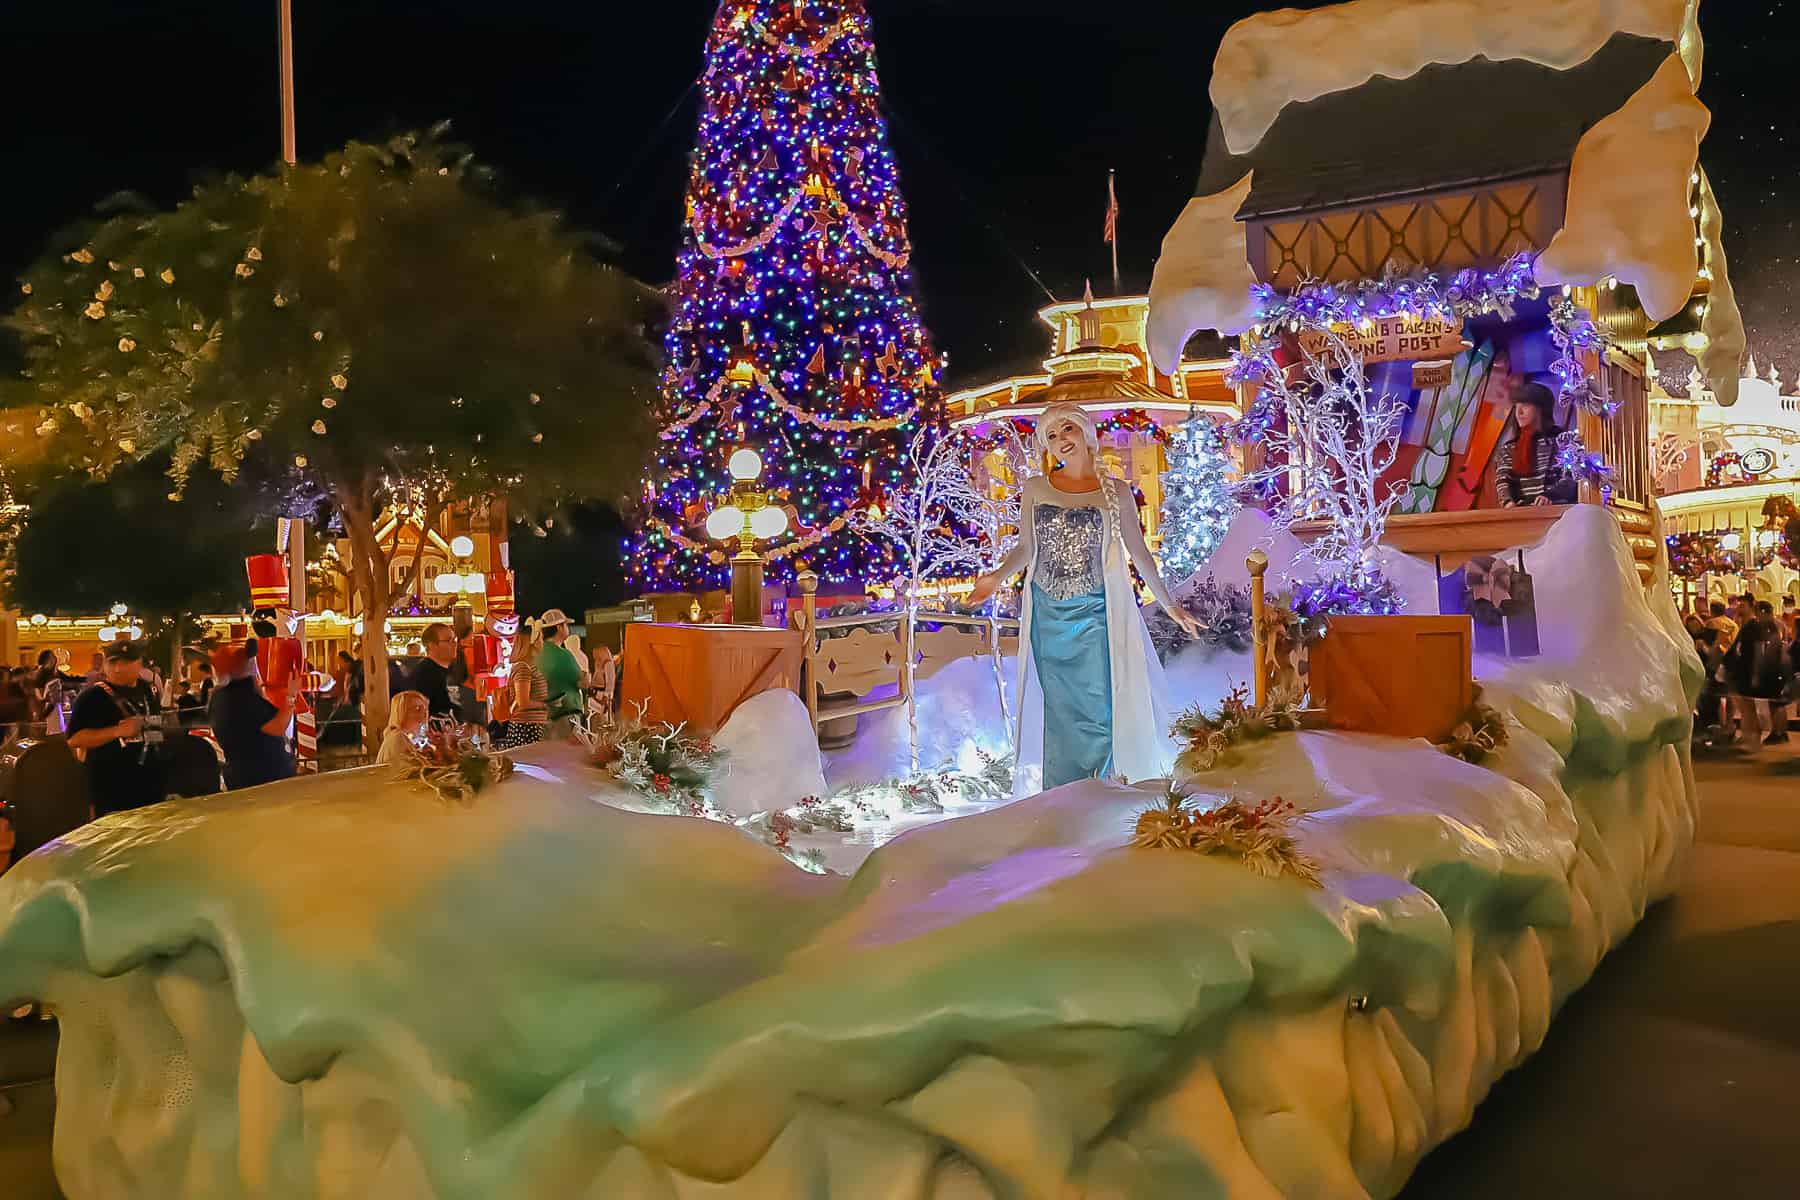 Elsa poses on the parade float. This is the nighttime version. 